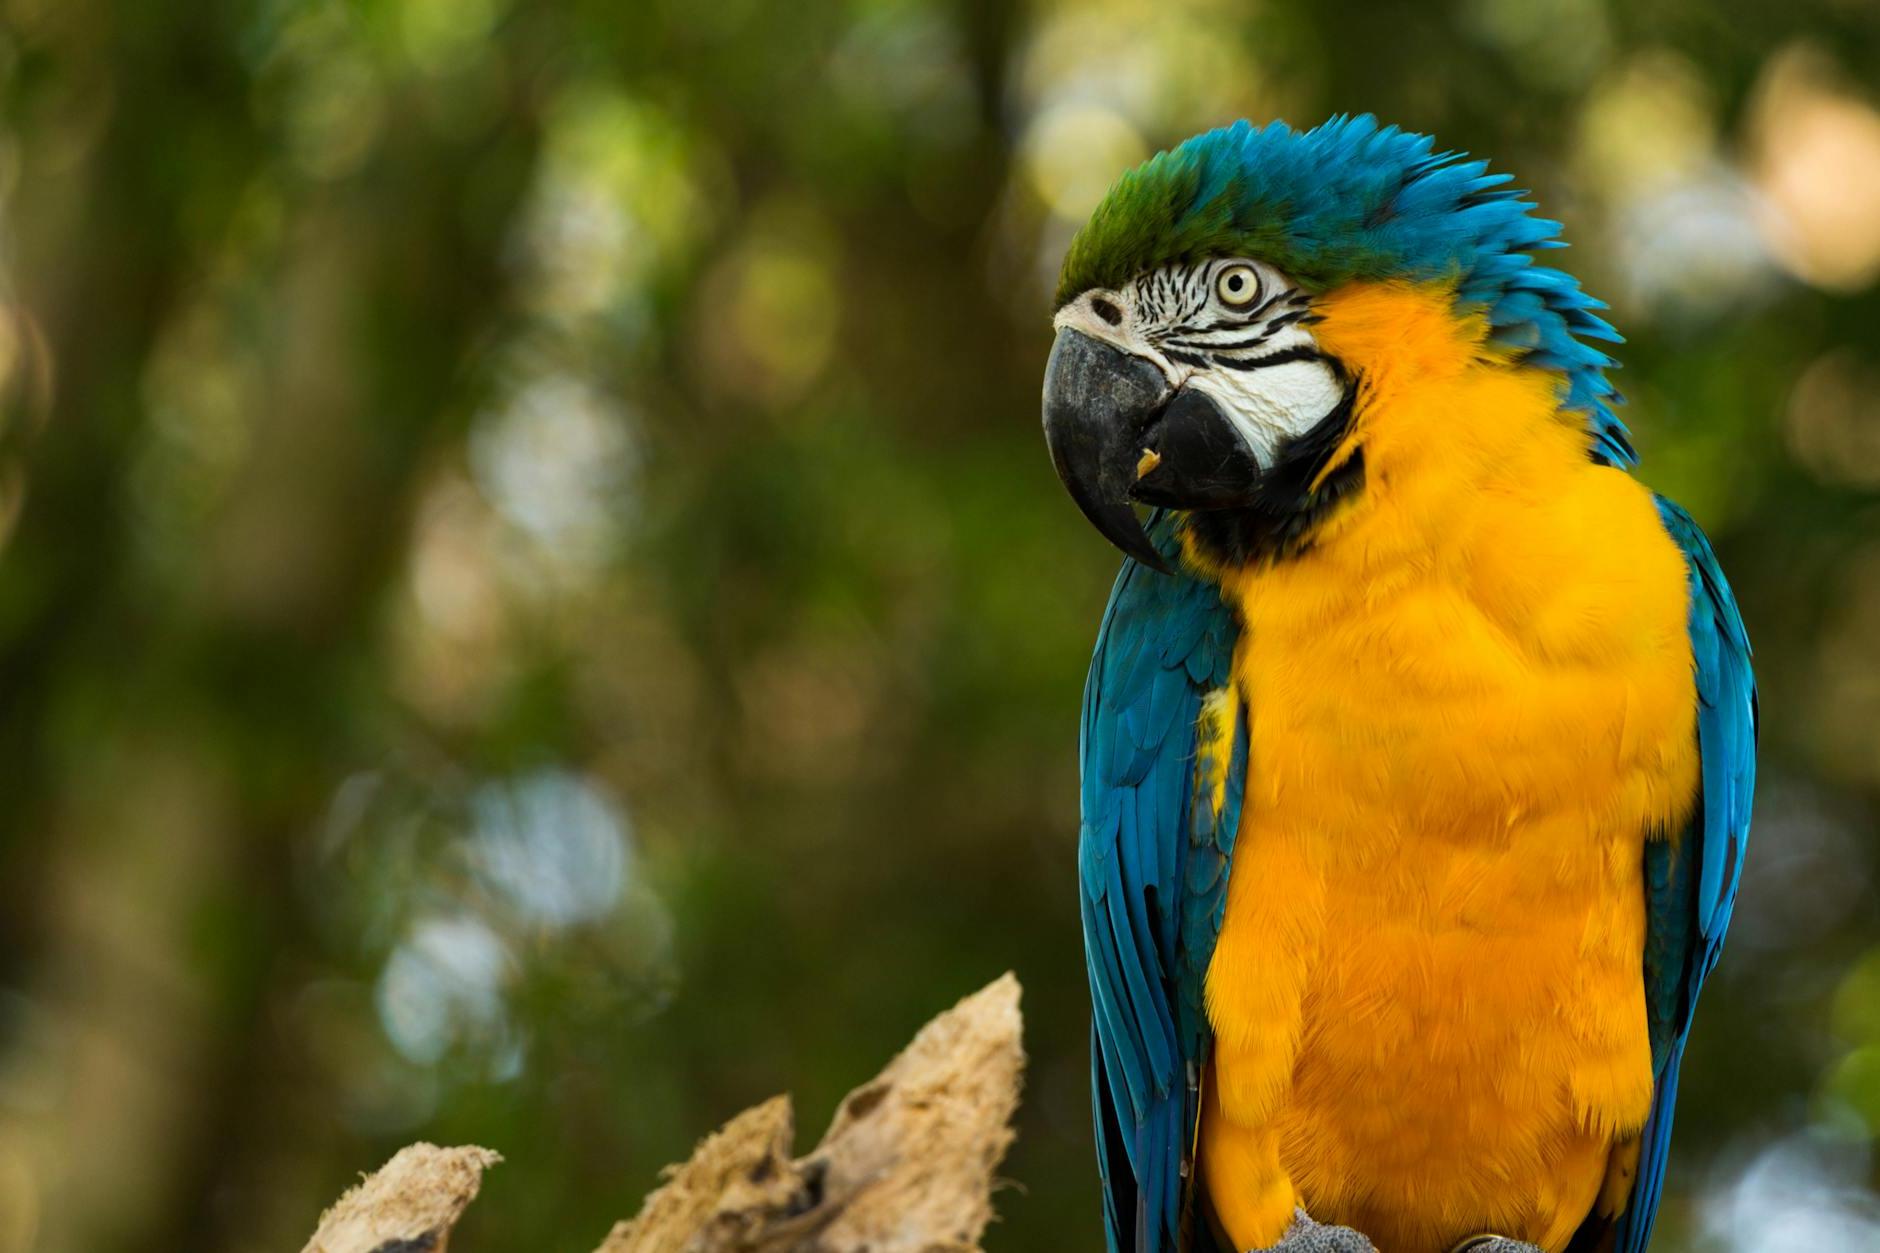 Selective-focus Photography of Blue Macaw